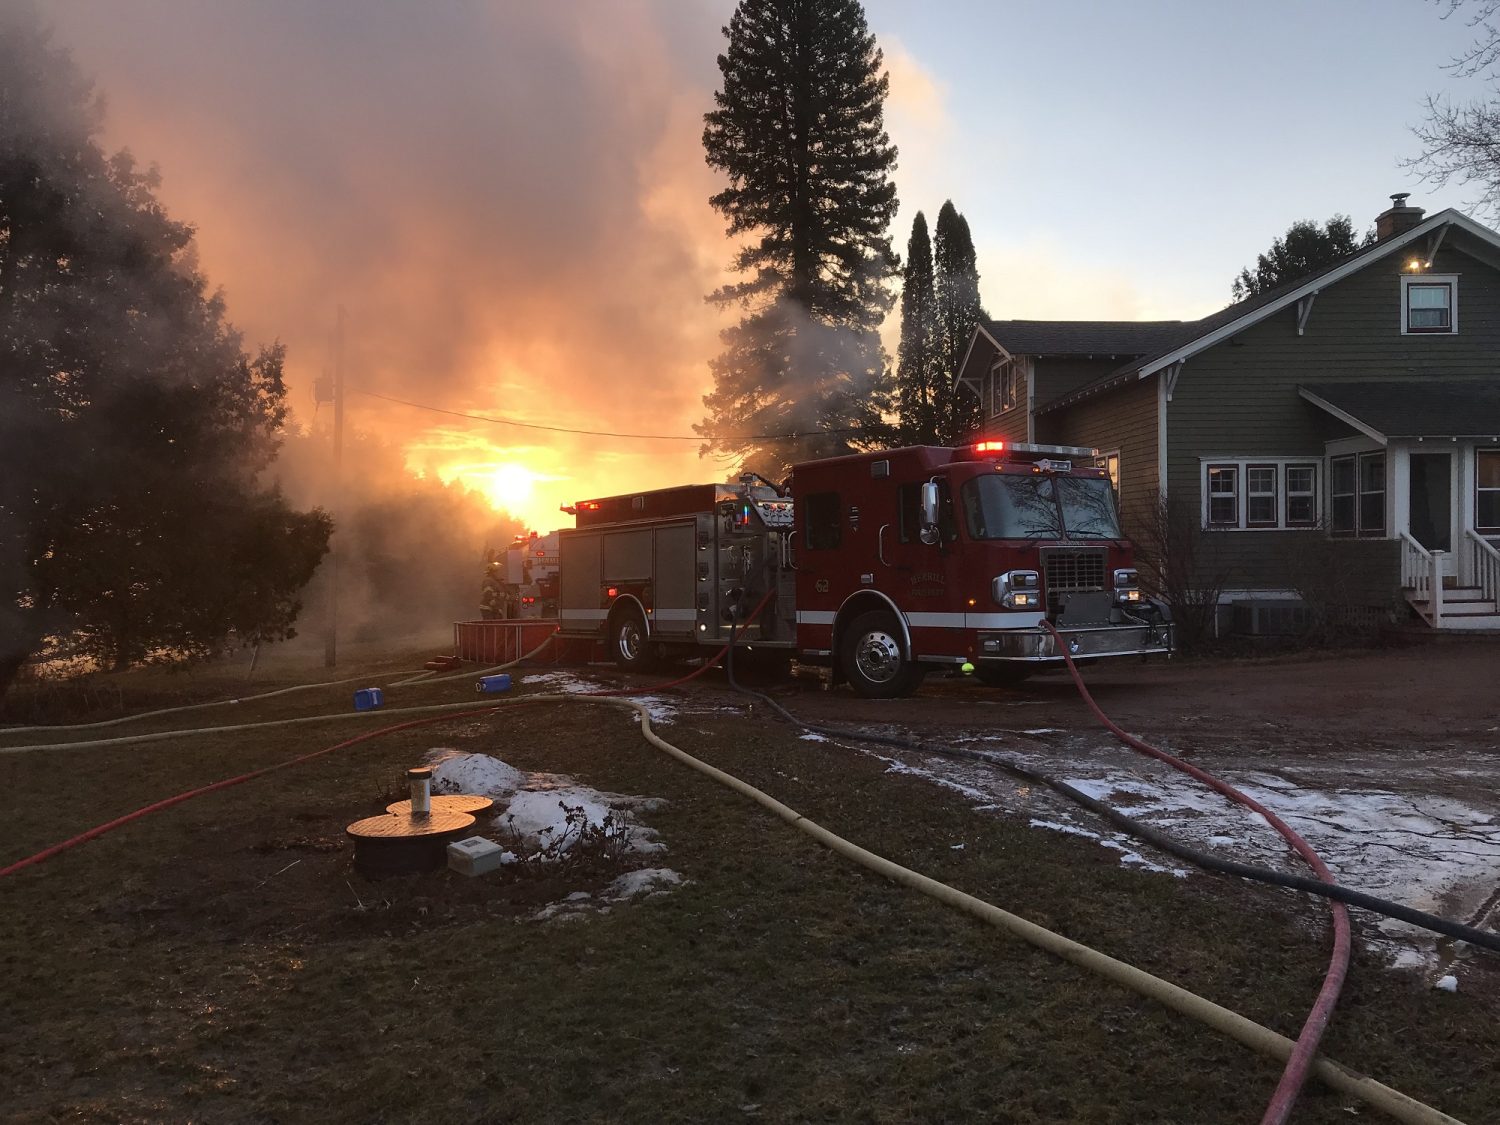 Town of Scott barn fire results in total loss